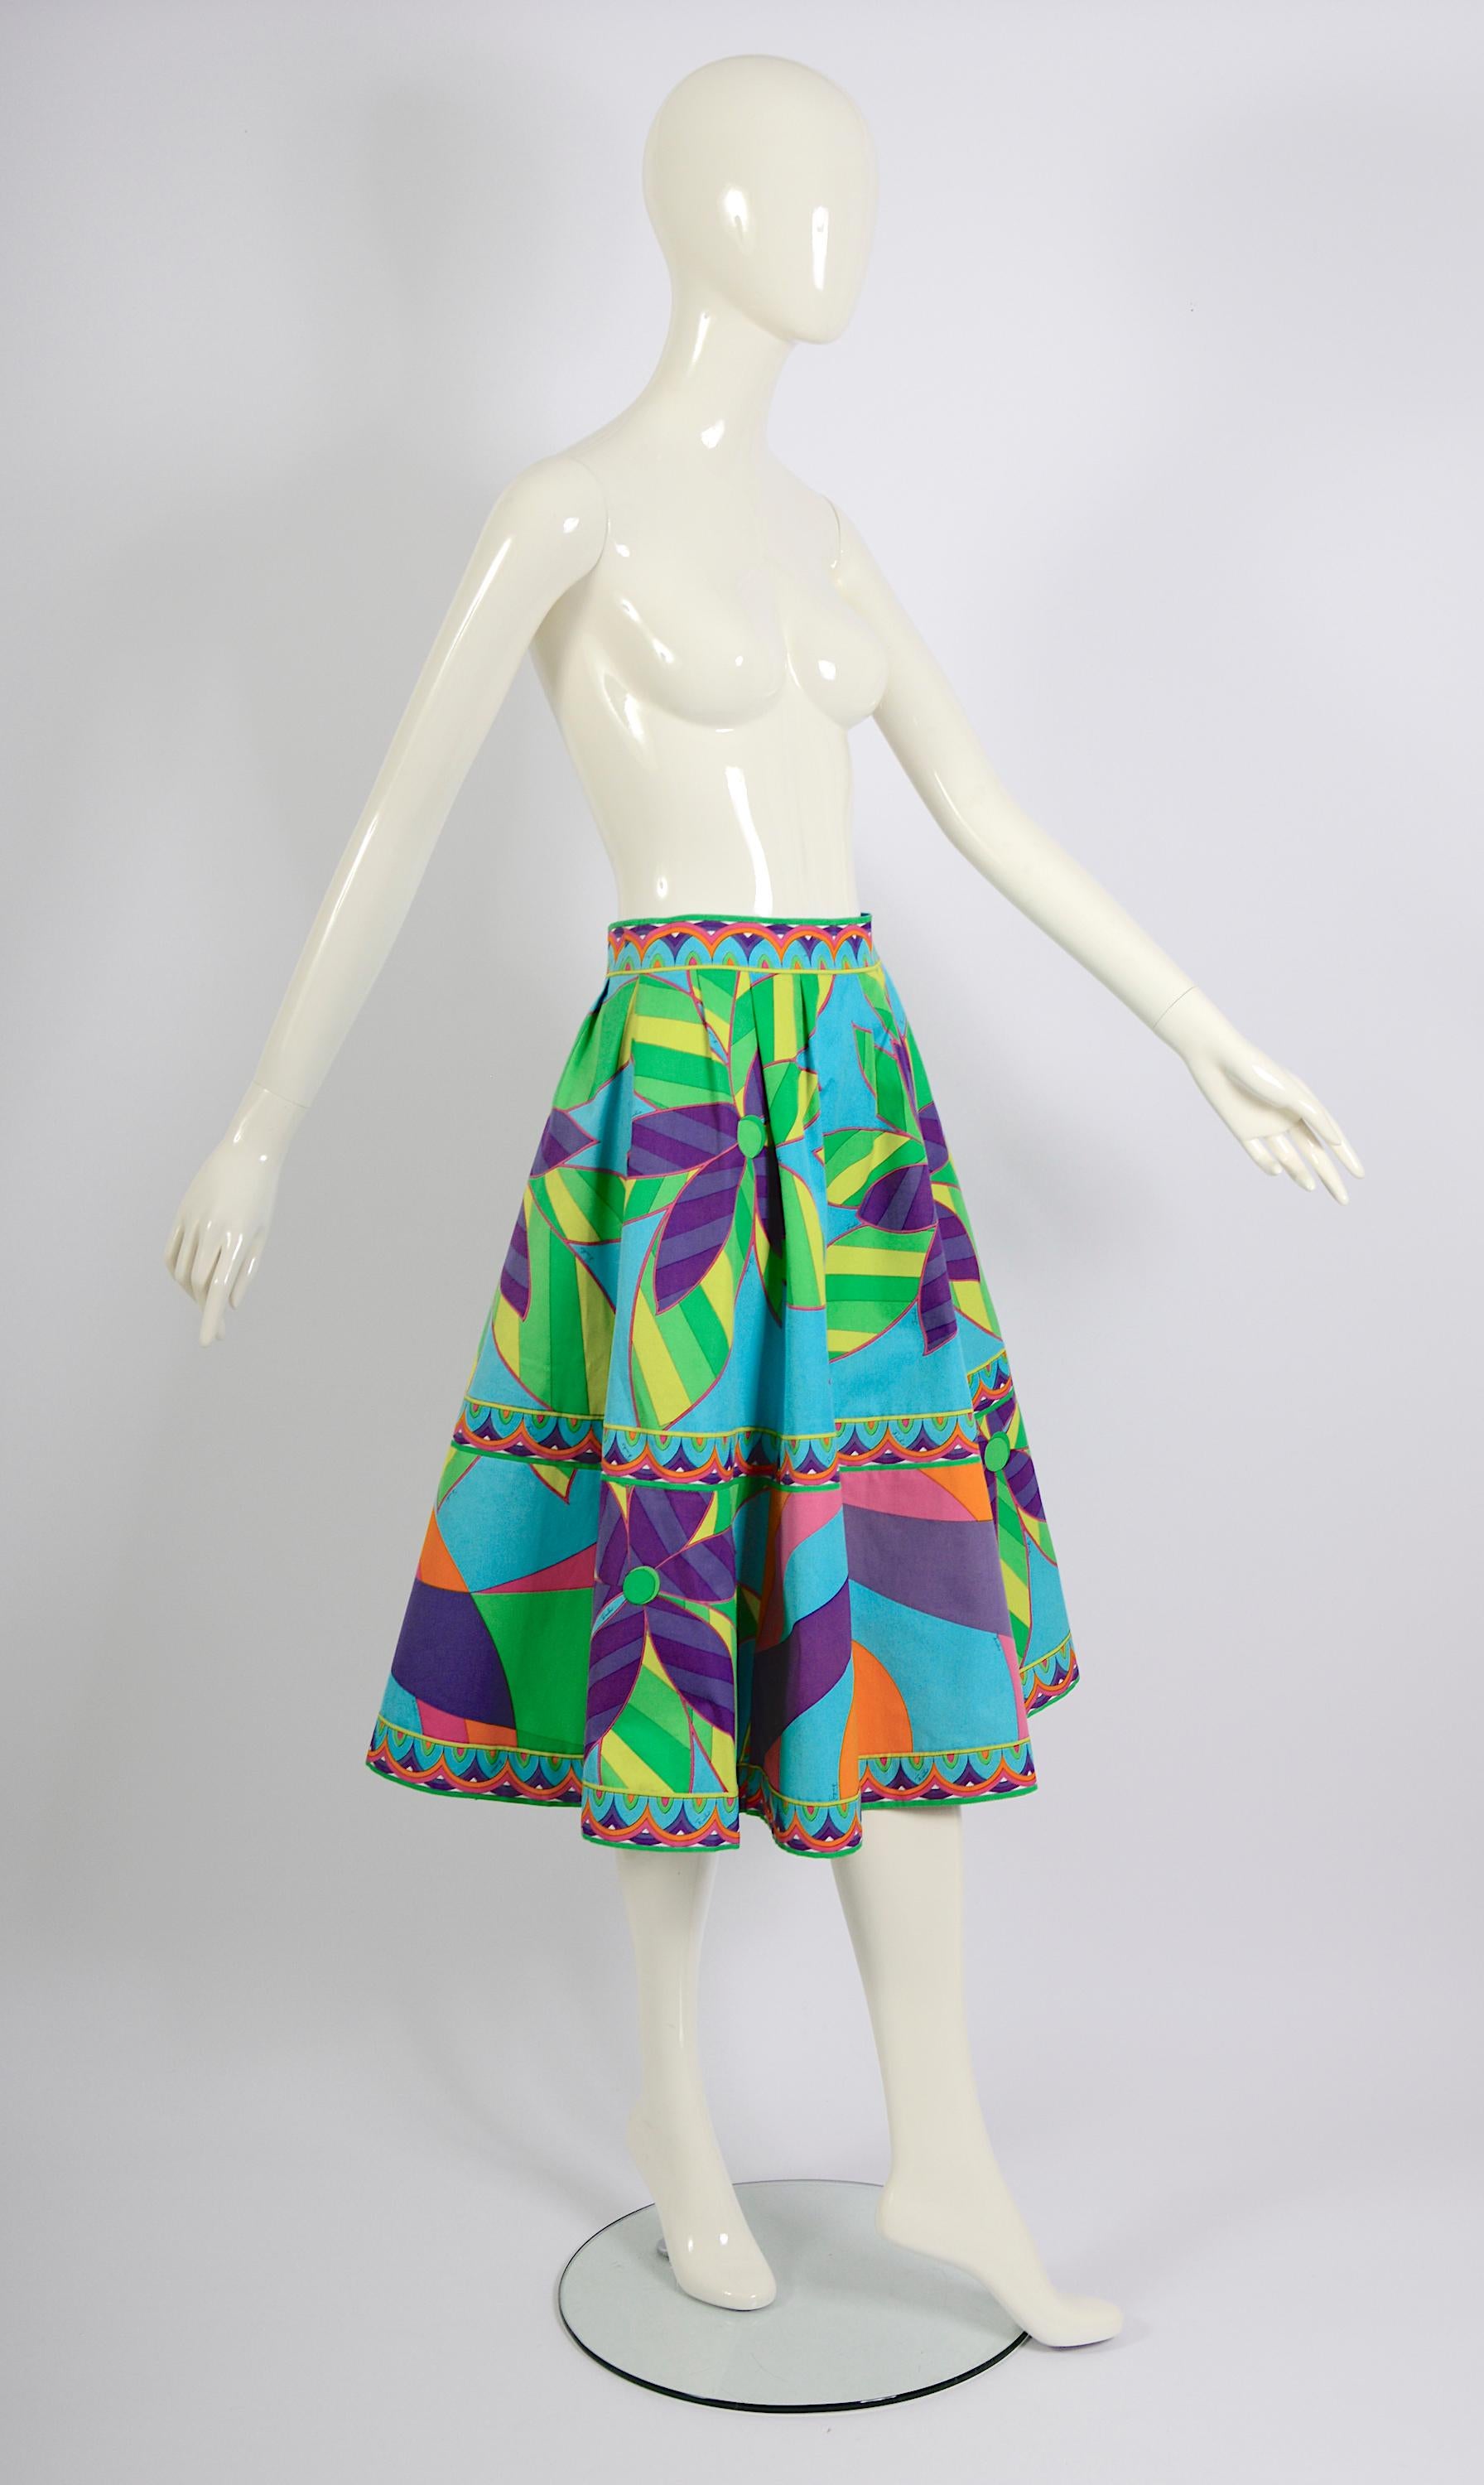 The ideal holiday skirt. A rare 1960s flower print circle  skirt by Emilio Pucci crafted in pure cotton. The skirt has a fitted waistband and pleats at the front and back The pattern features a geometric swirl design in shades of aqua blue, purple,